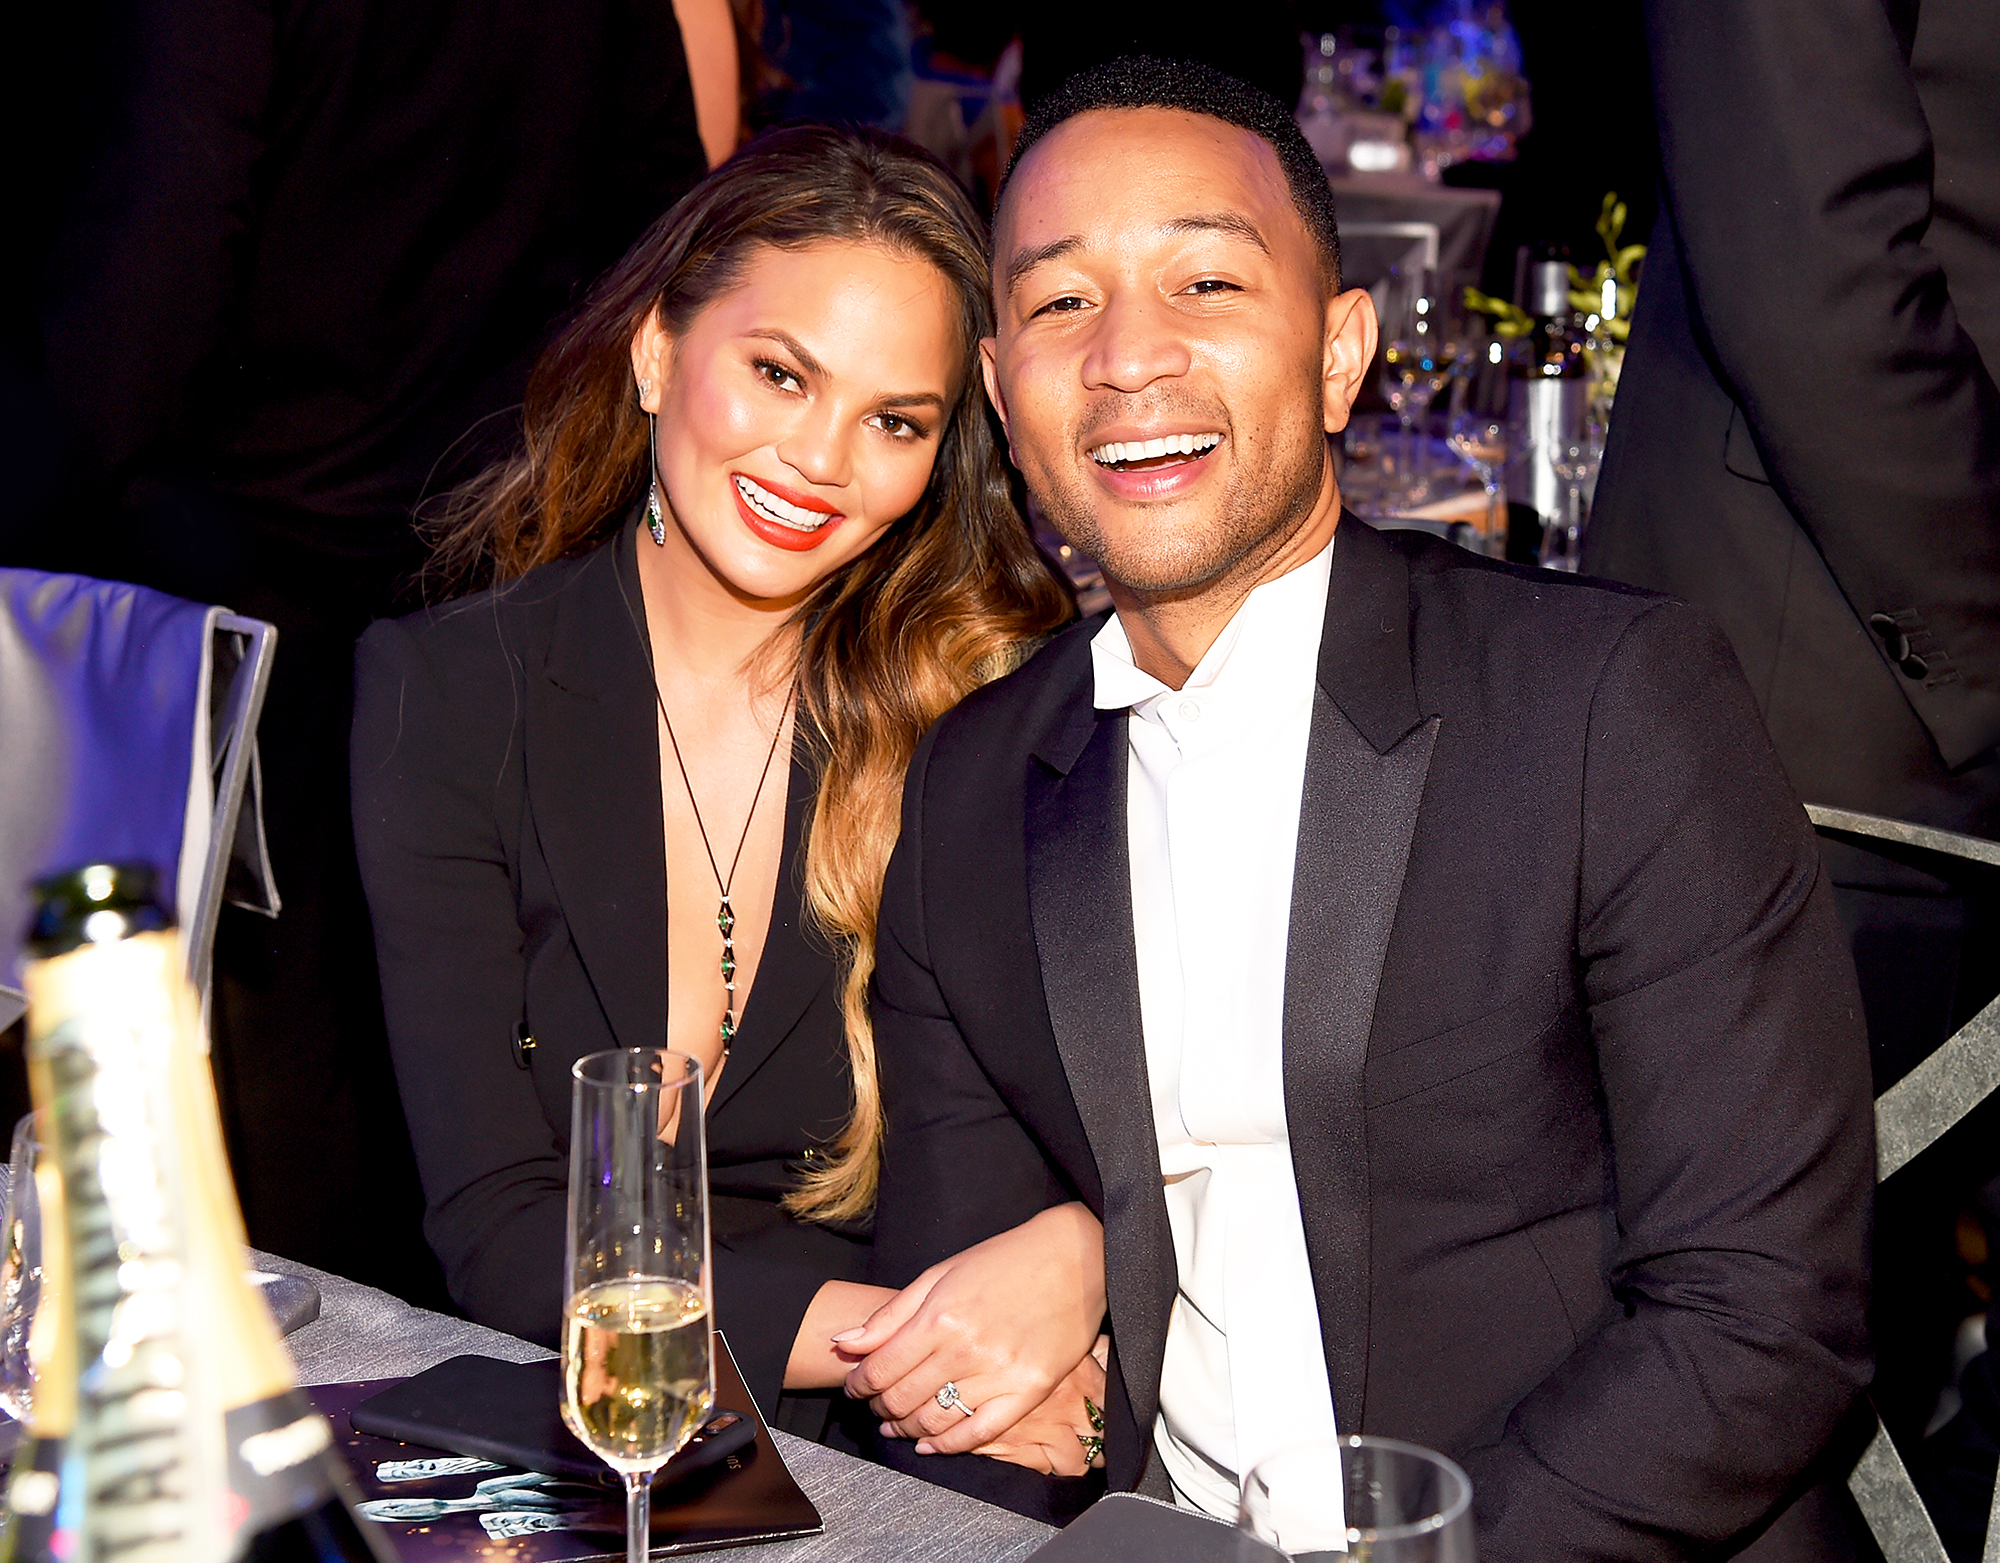 Chrissy Teigen Shares Too Much About Sex Life With John Legend